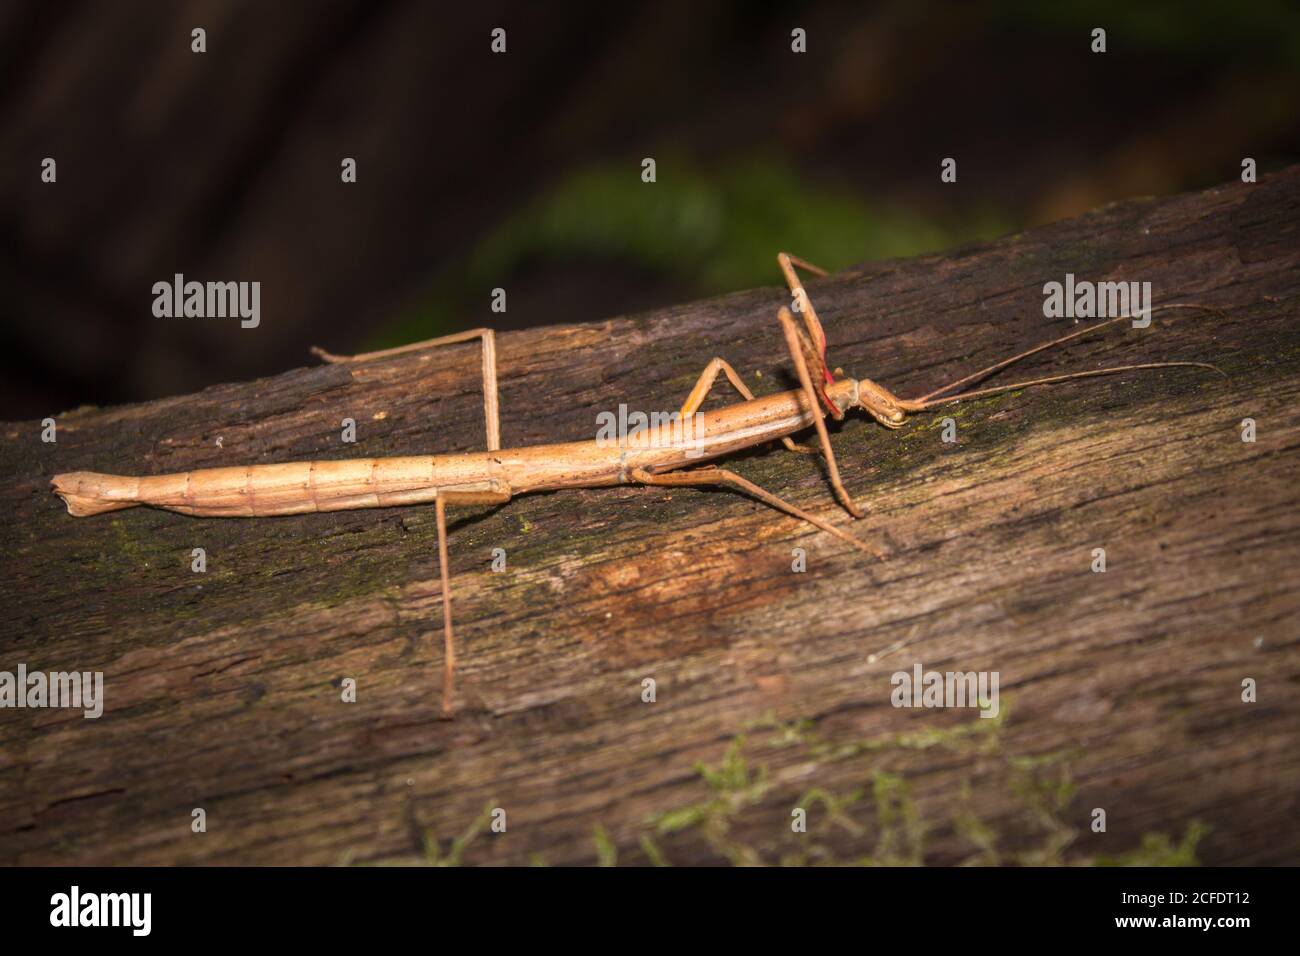 Indian Stick Insect (Carausius morosus), Cape Town, South Africa Stock Photo